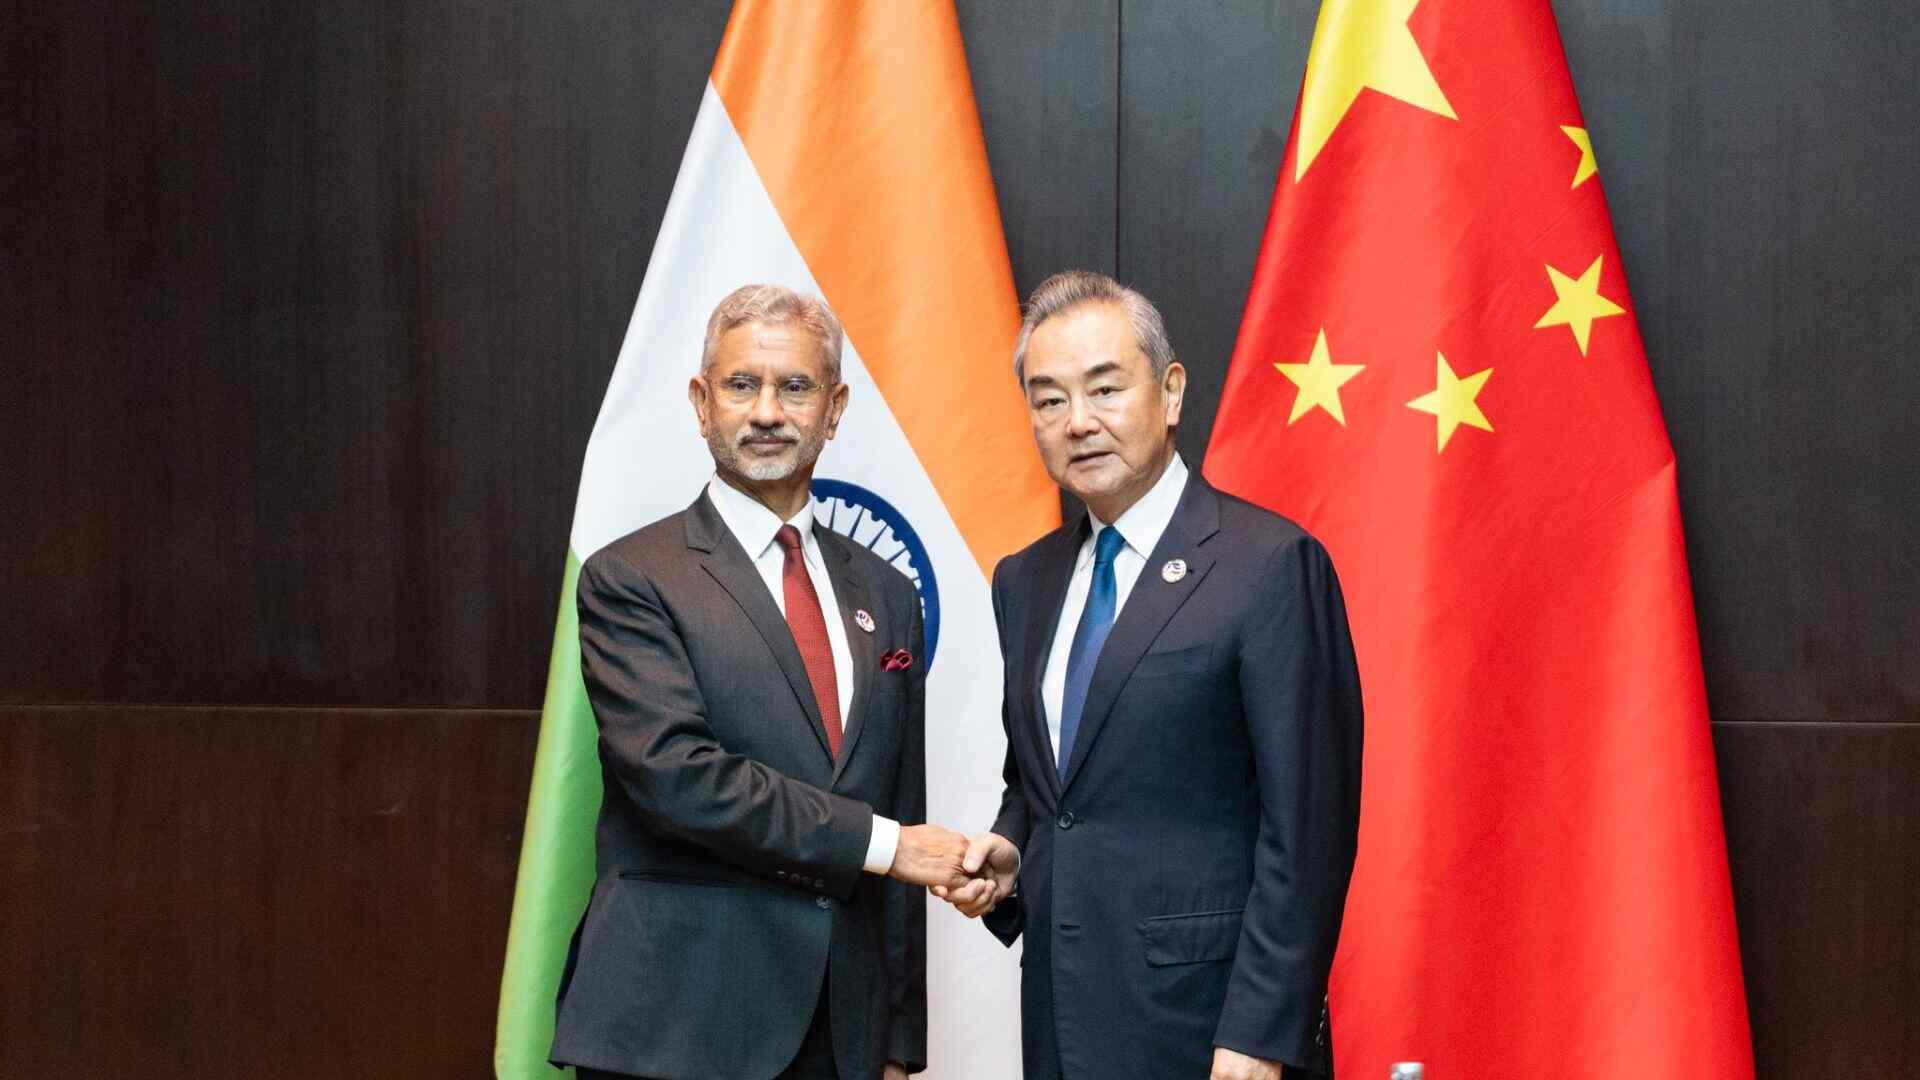 EAM Jaishankar Addresses Border Disputes In Meeting With Chinese Foreign Minister